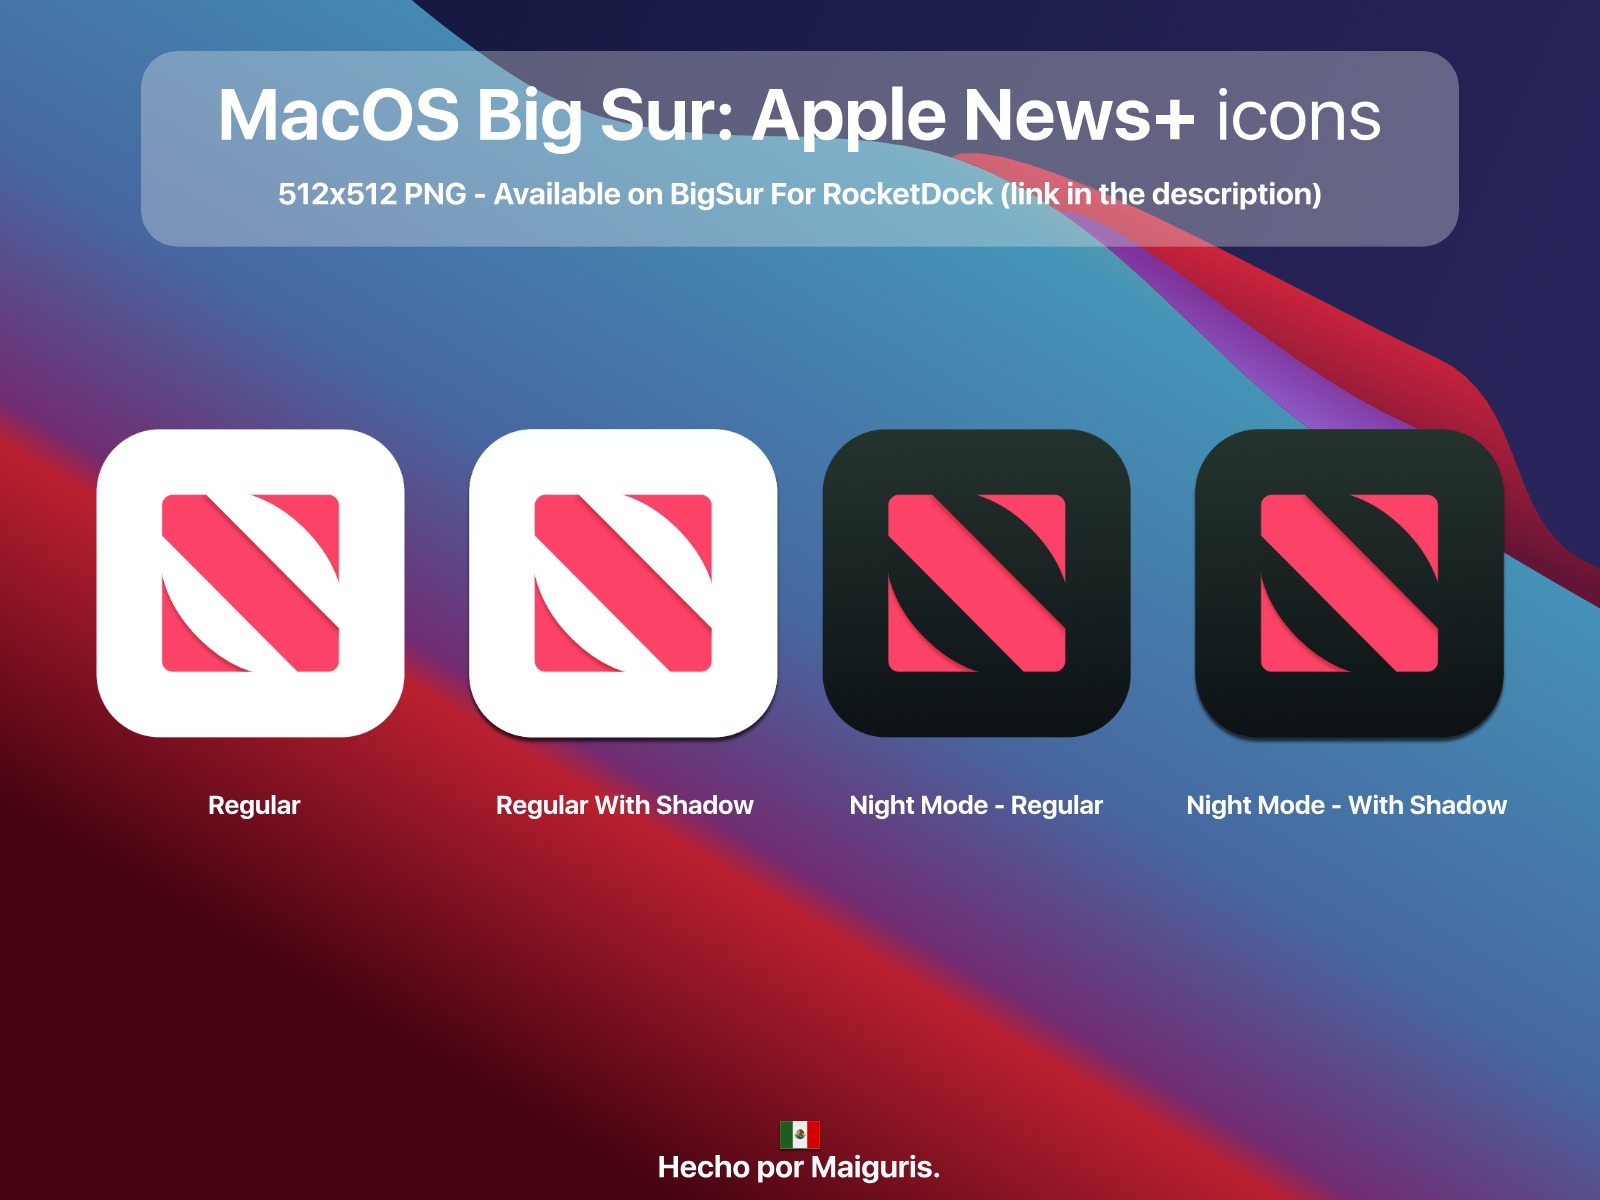 macOS Big Sur: Apple News+ icons by Ivan R. on Dribbble